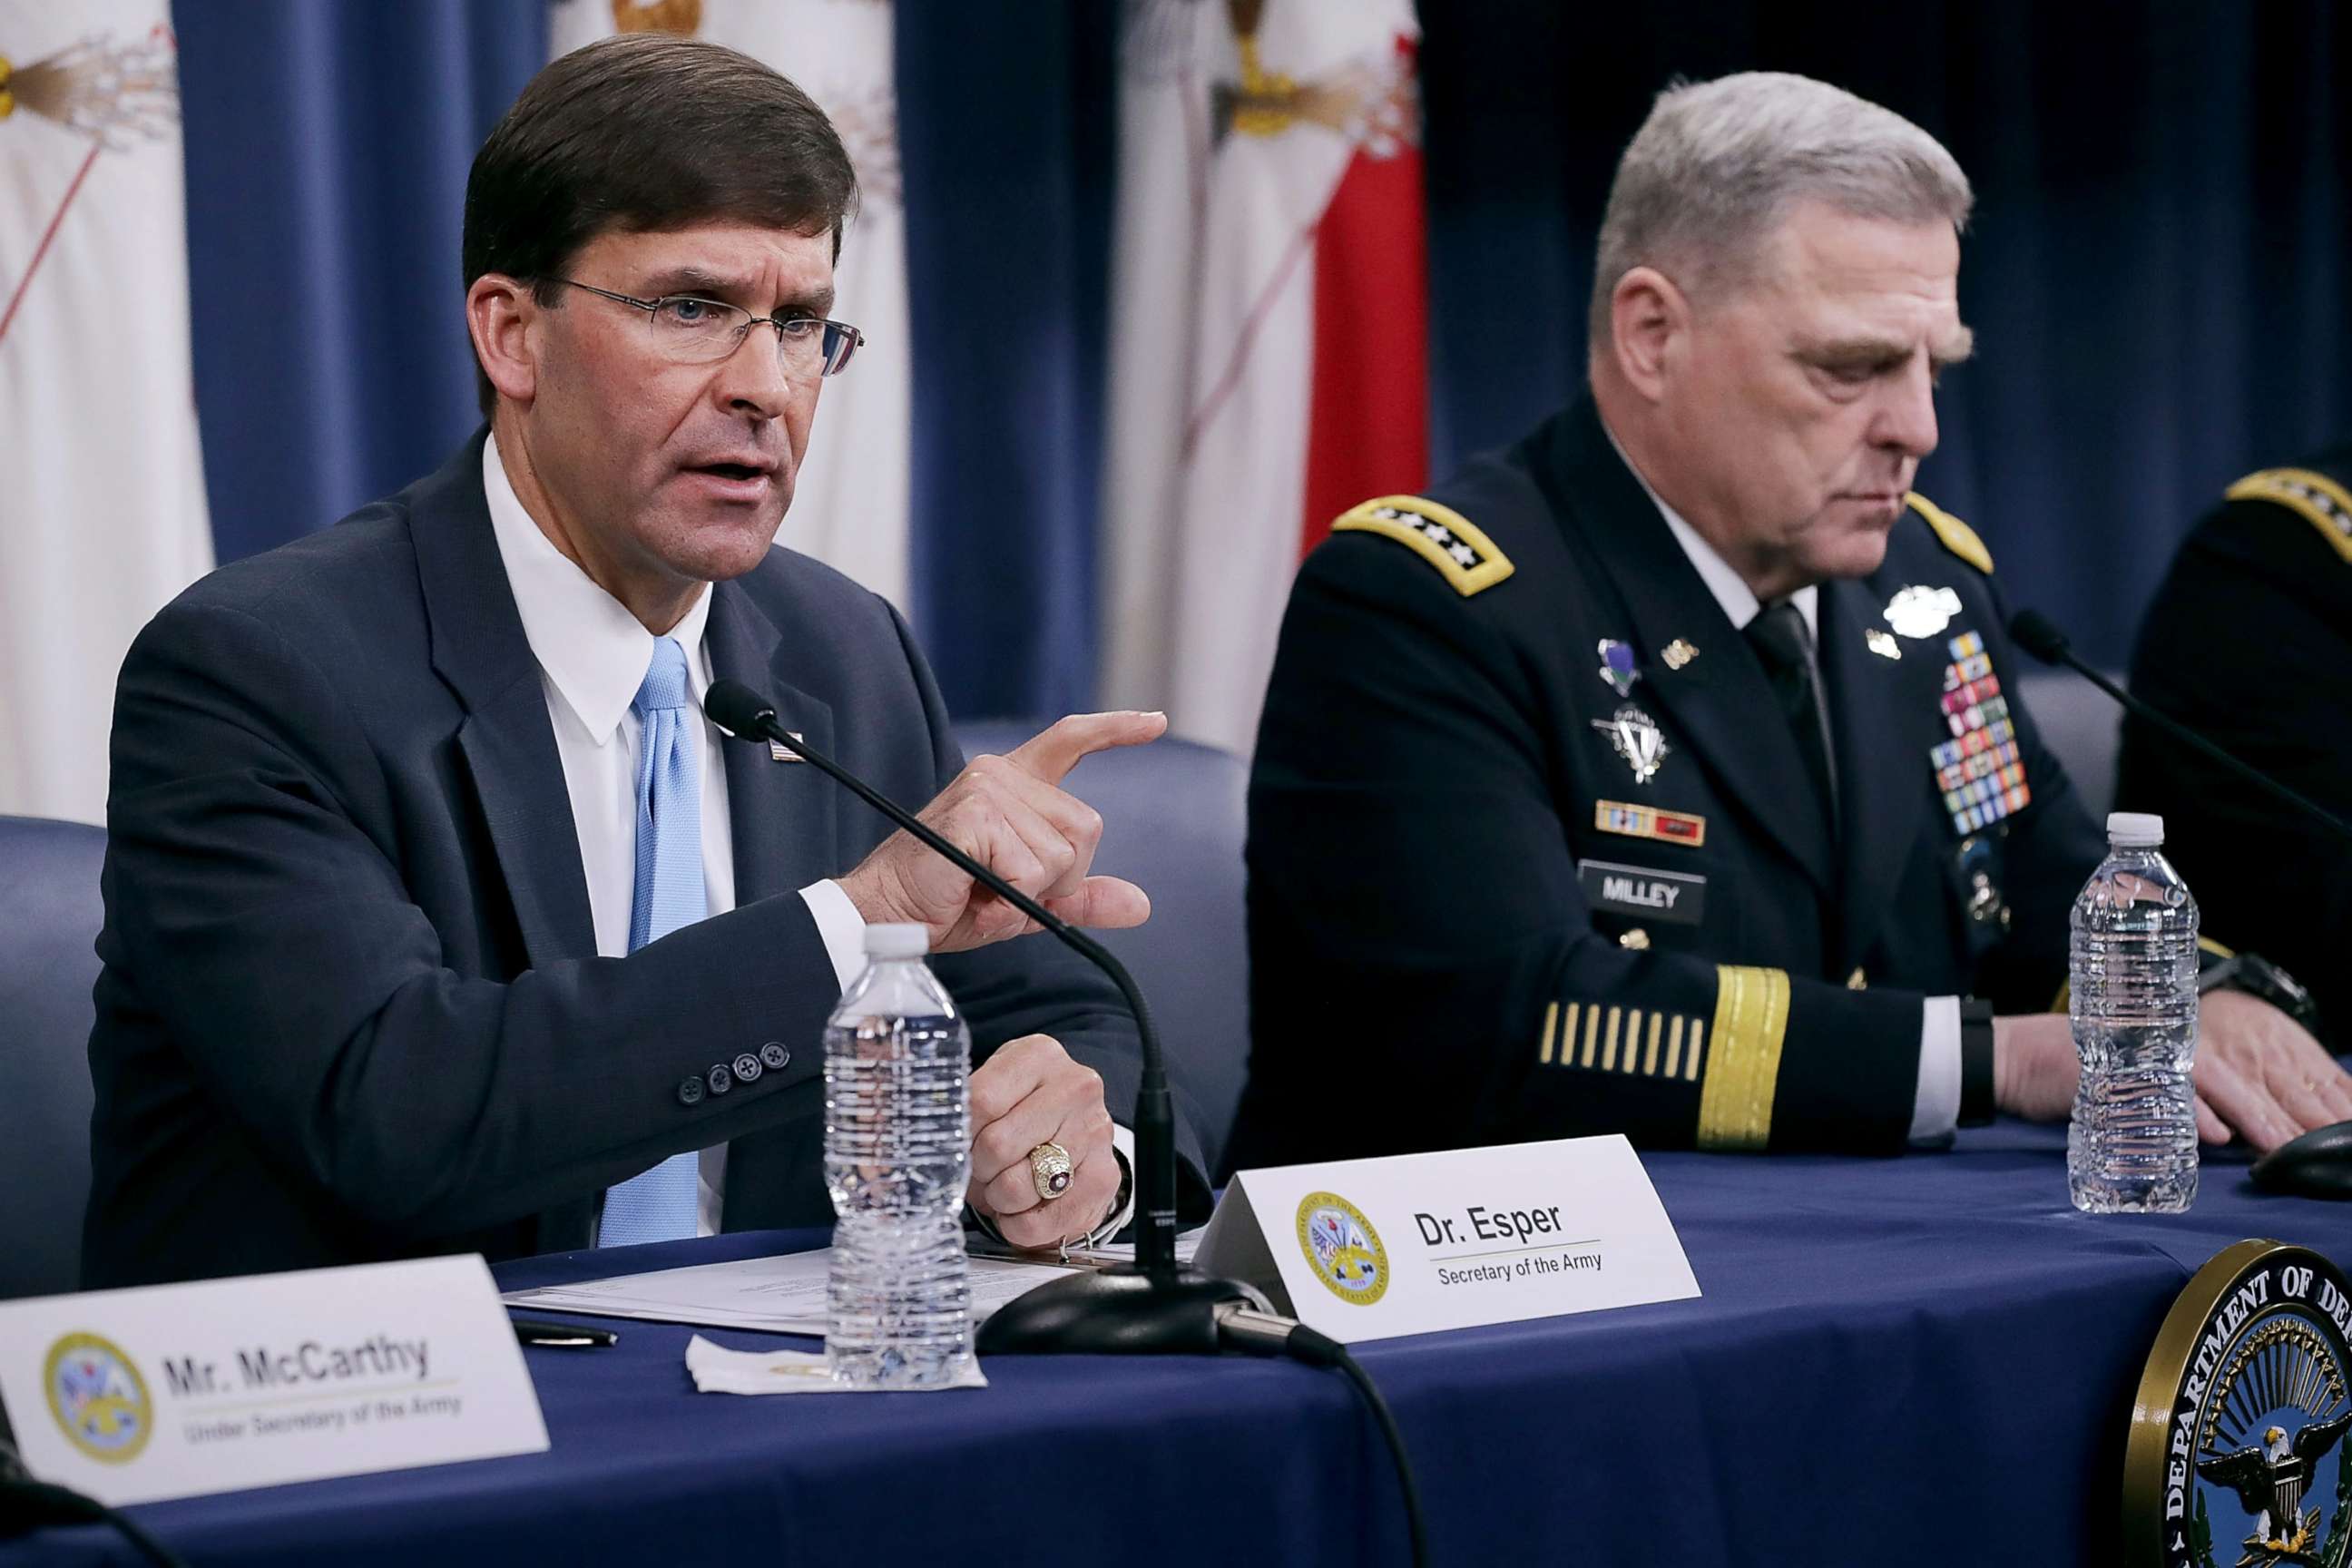 PHOTO: Army Secretary Mark Esper and Army Chief of Staff Gen. Mark Milley announce that Austin, Texas, will be the new headquarters for the Army Futures Command during a news conference at the Pentagon, July 13, 2018 in Arlington, Virginia.